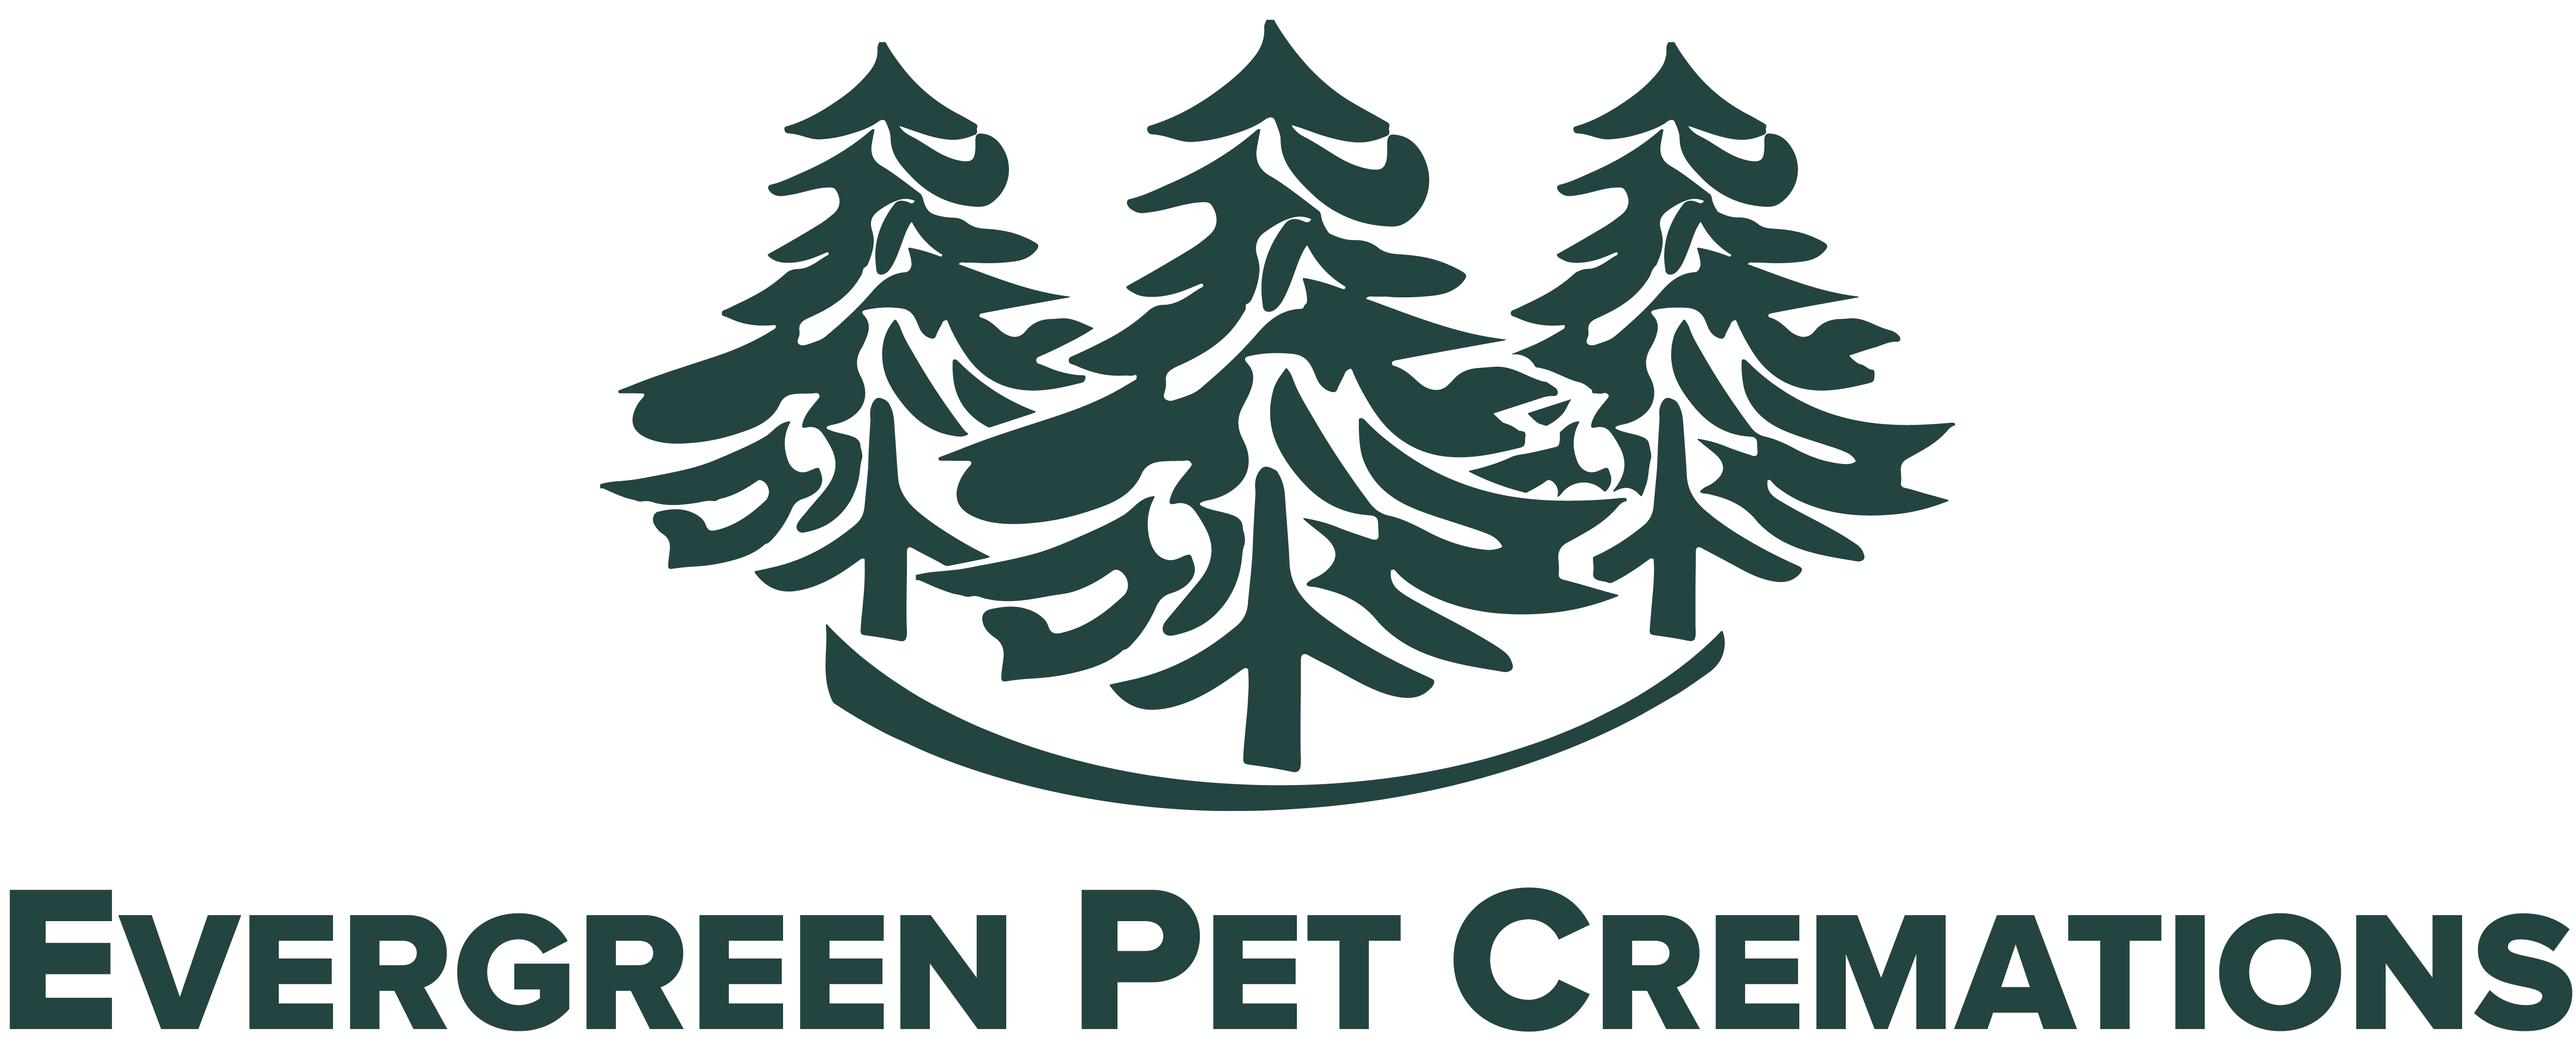 Evergreen Pet Cremations